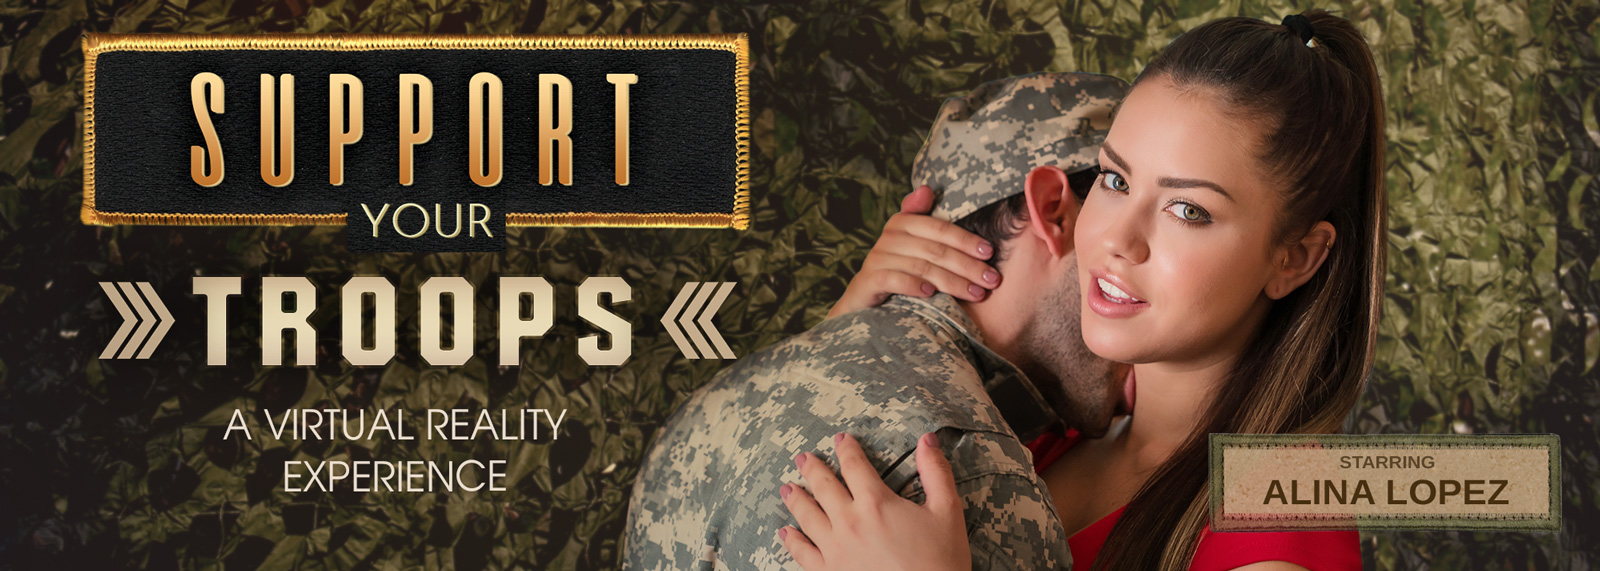 Support Your Troops! with Alina Lopez  Slideshow